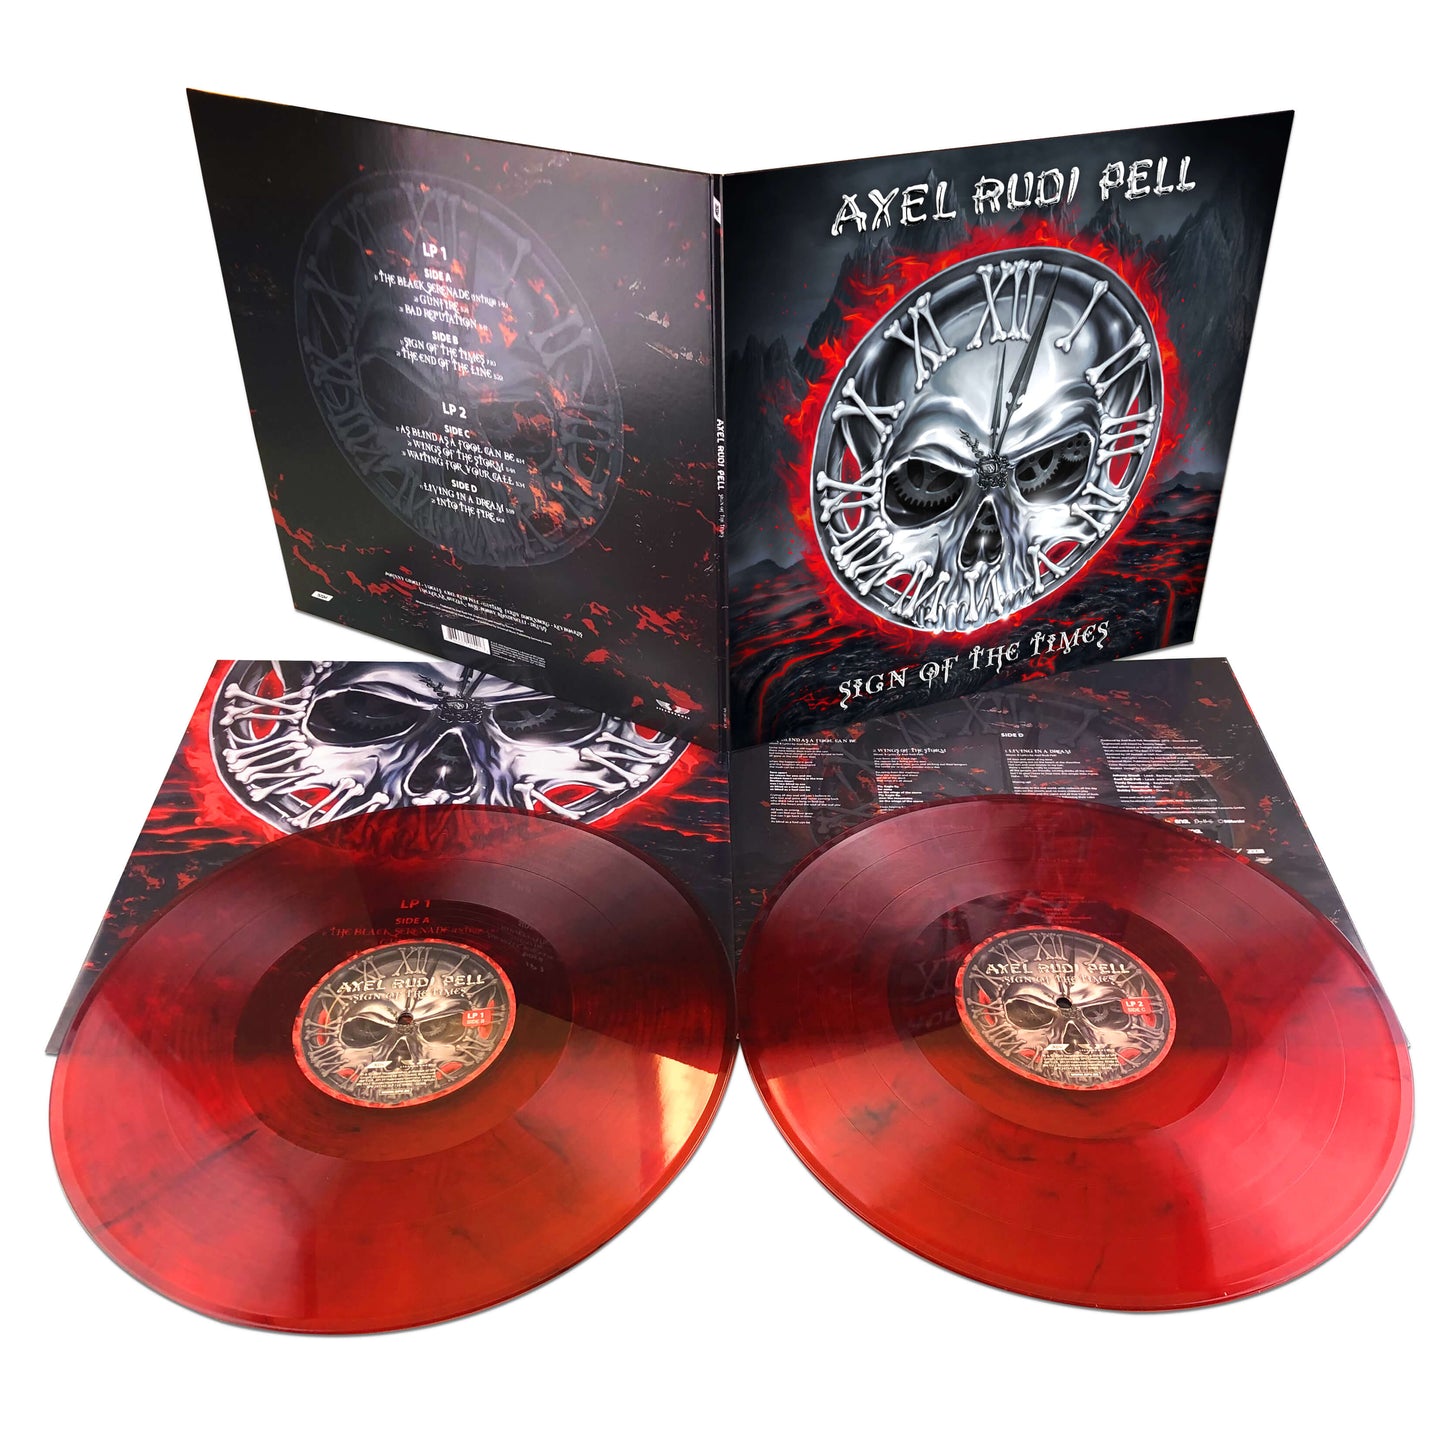 Axel Rudi Pell "Sign Of The Times" LP